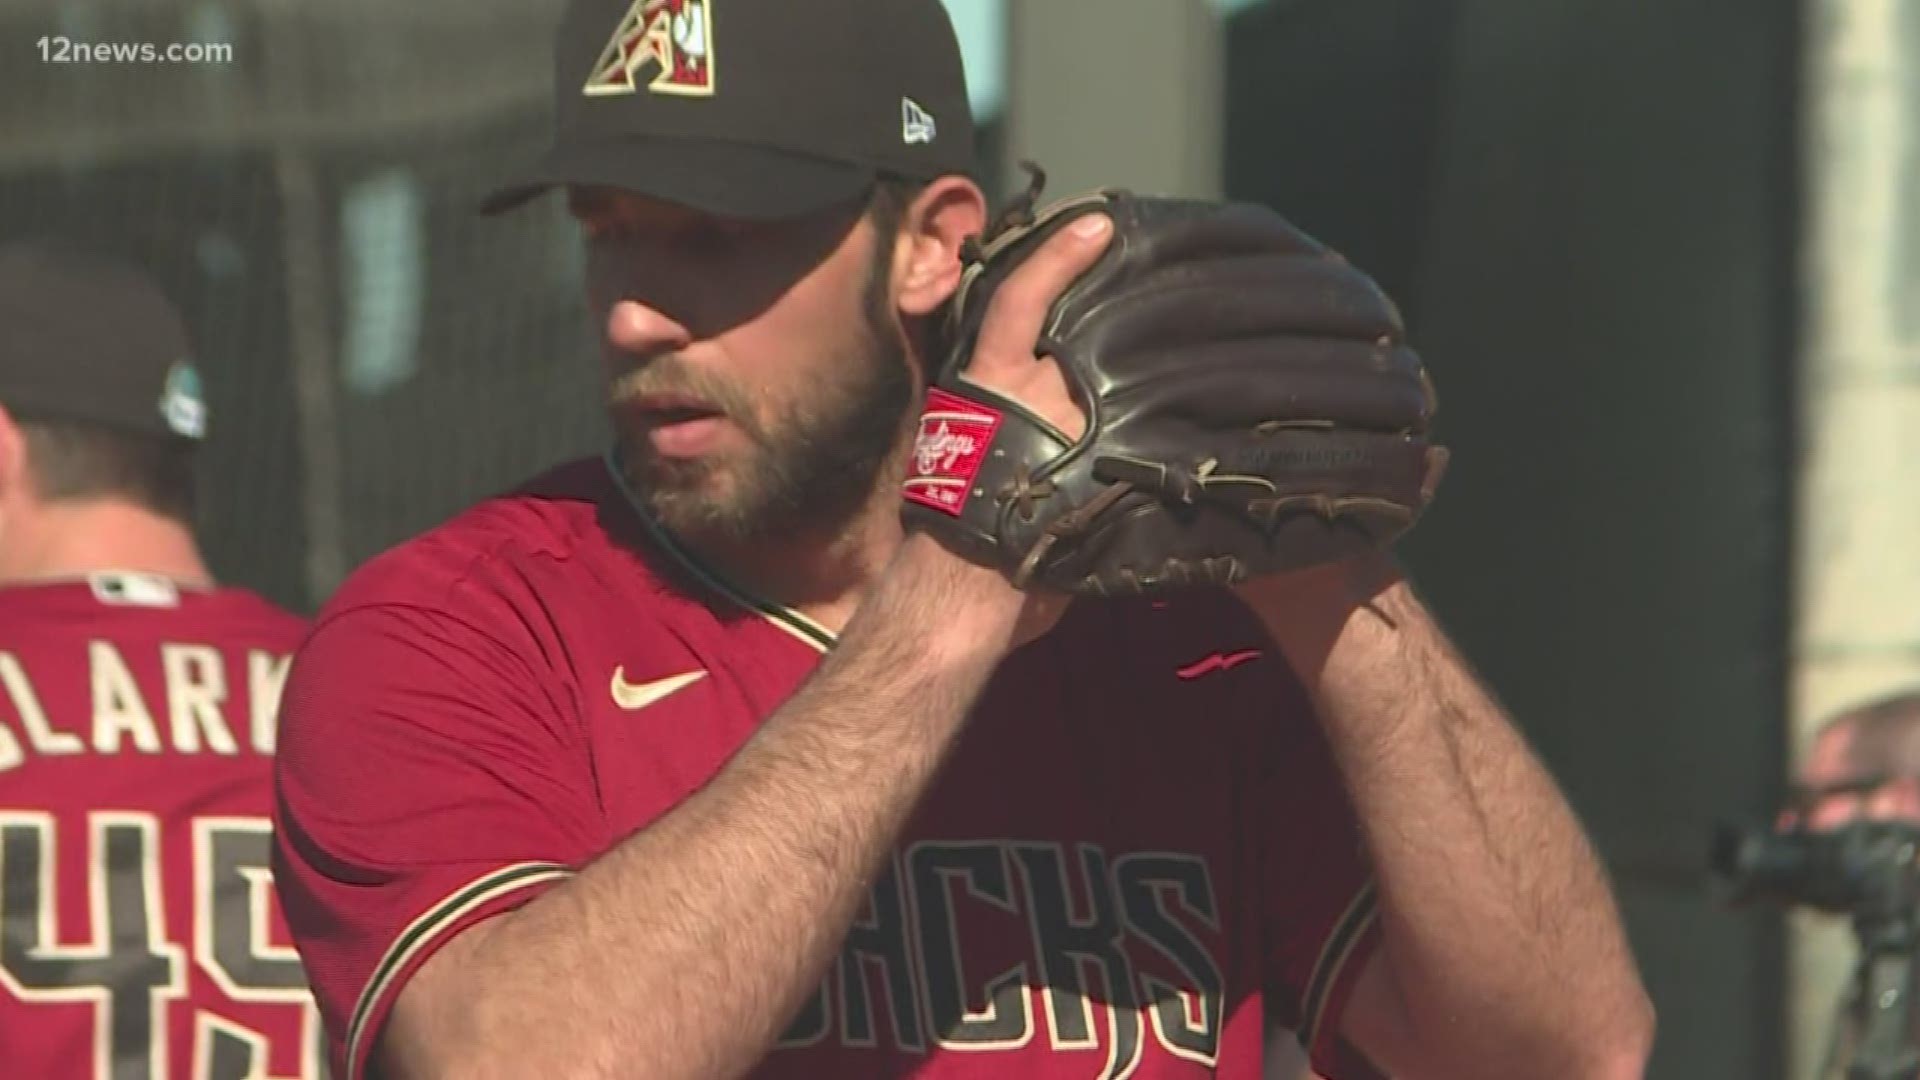 All eyes were on Madison Bumgarner as he threw bullpen for the first time in a D-backs uniform.